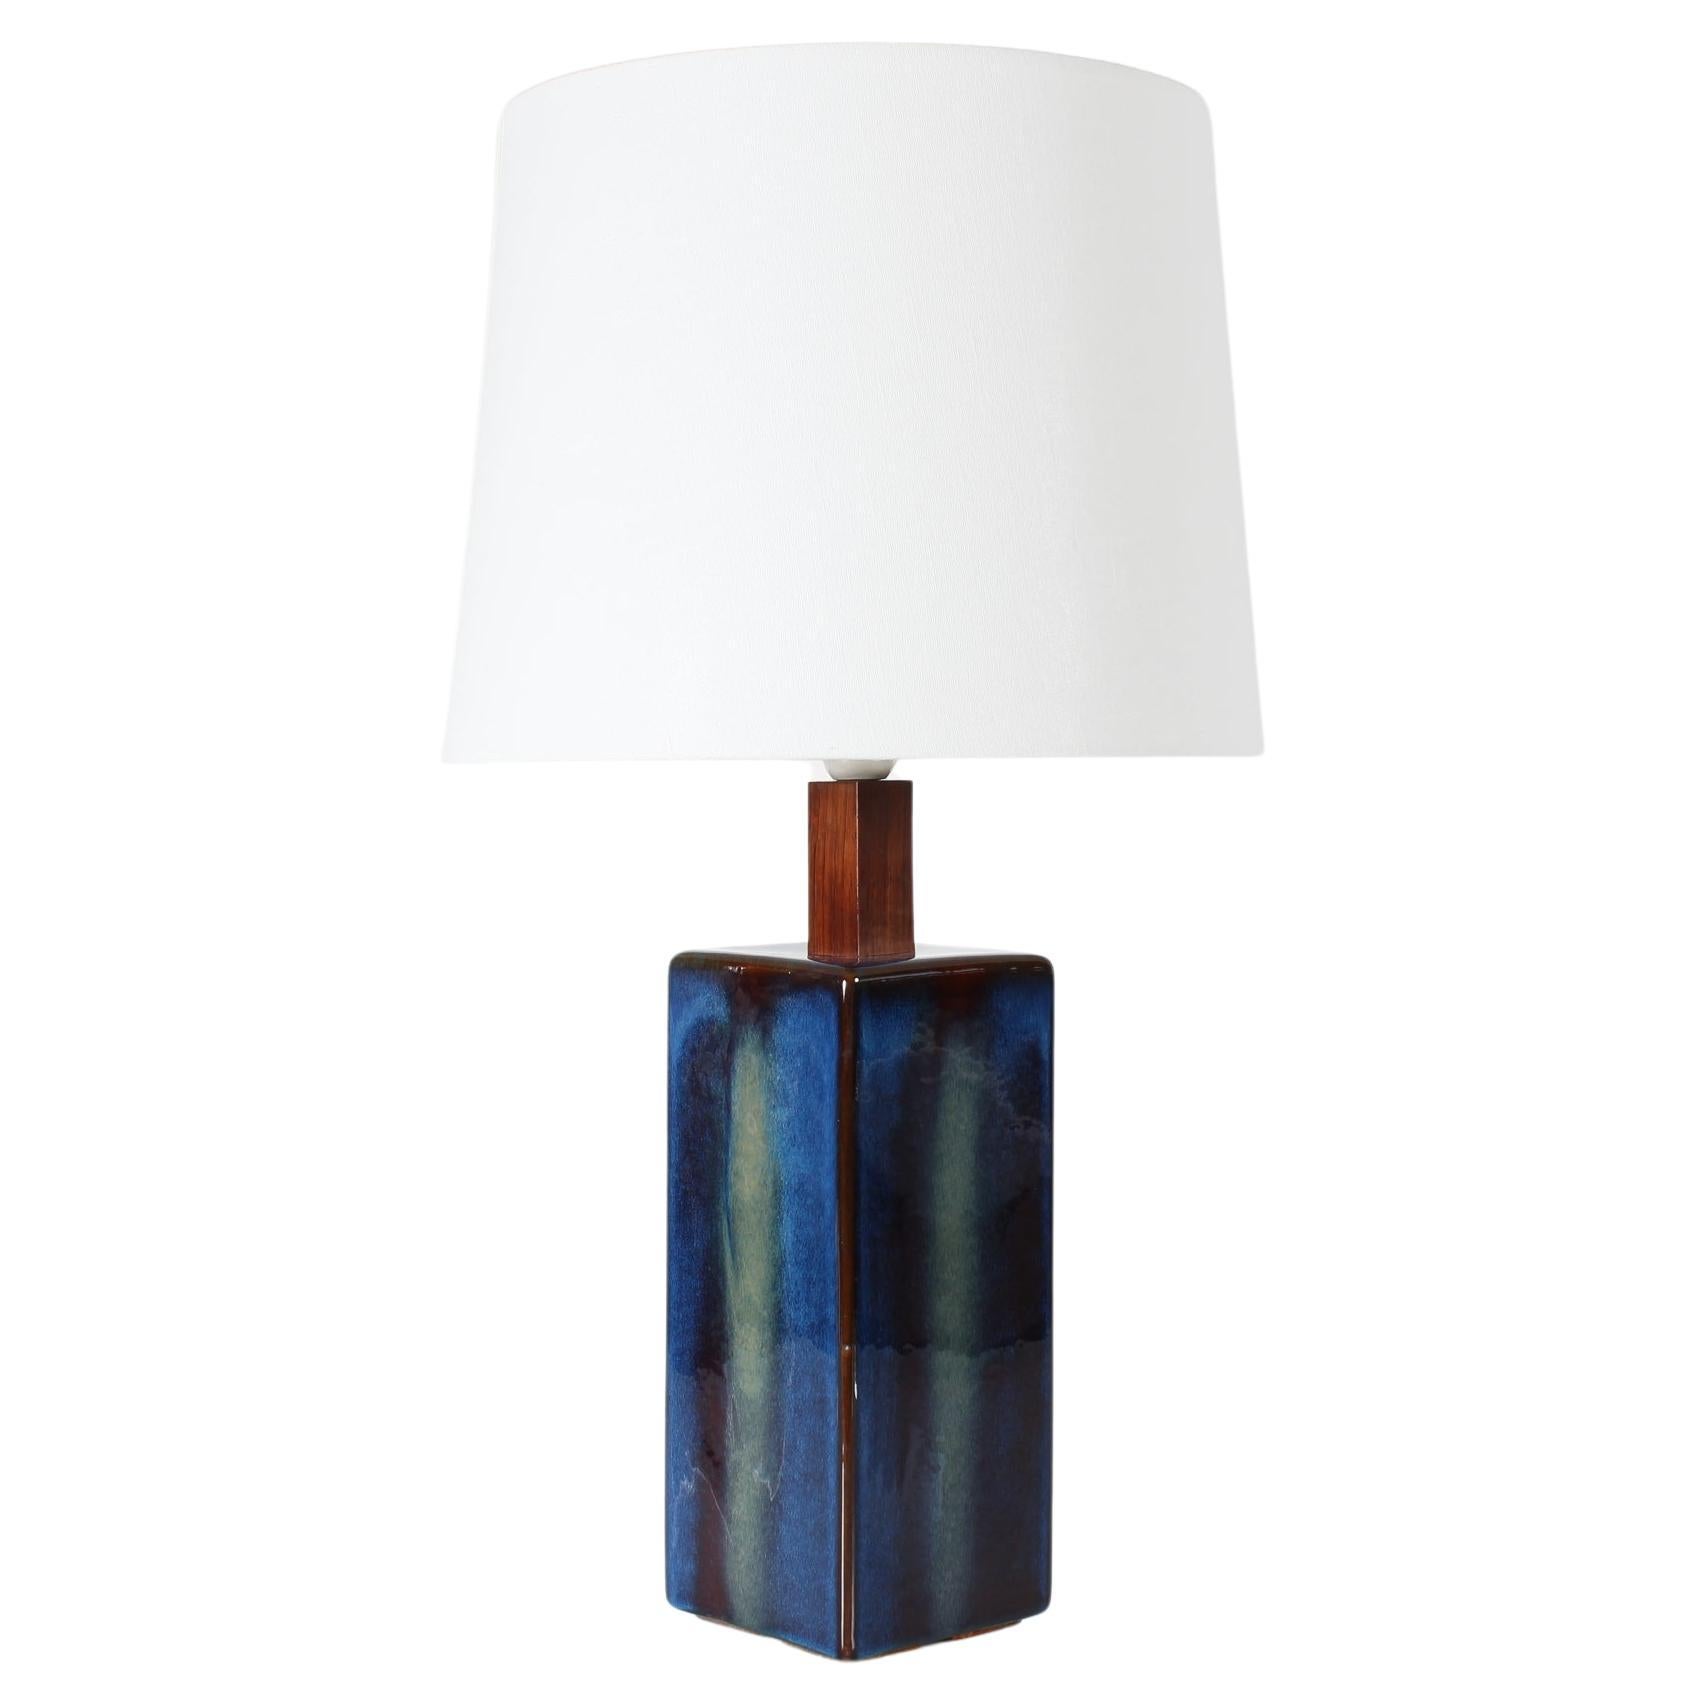 Tall Danish Sculptural Table Lamp with Glossy Dark Blue Glaze by Søholm  For Sale